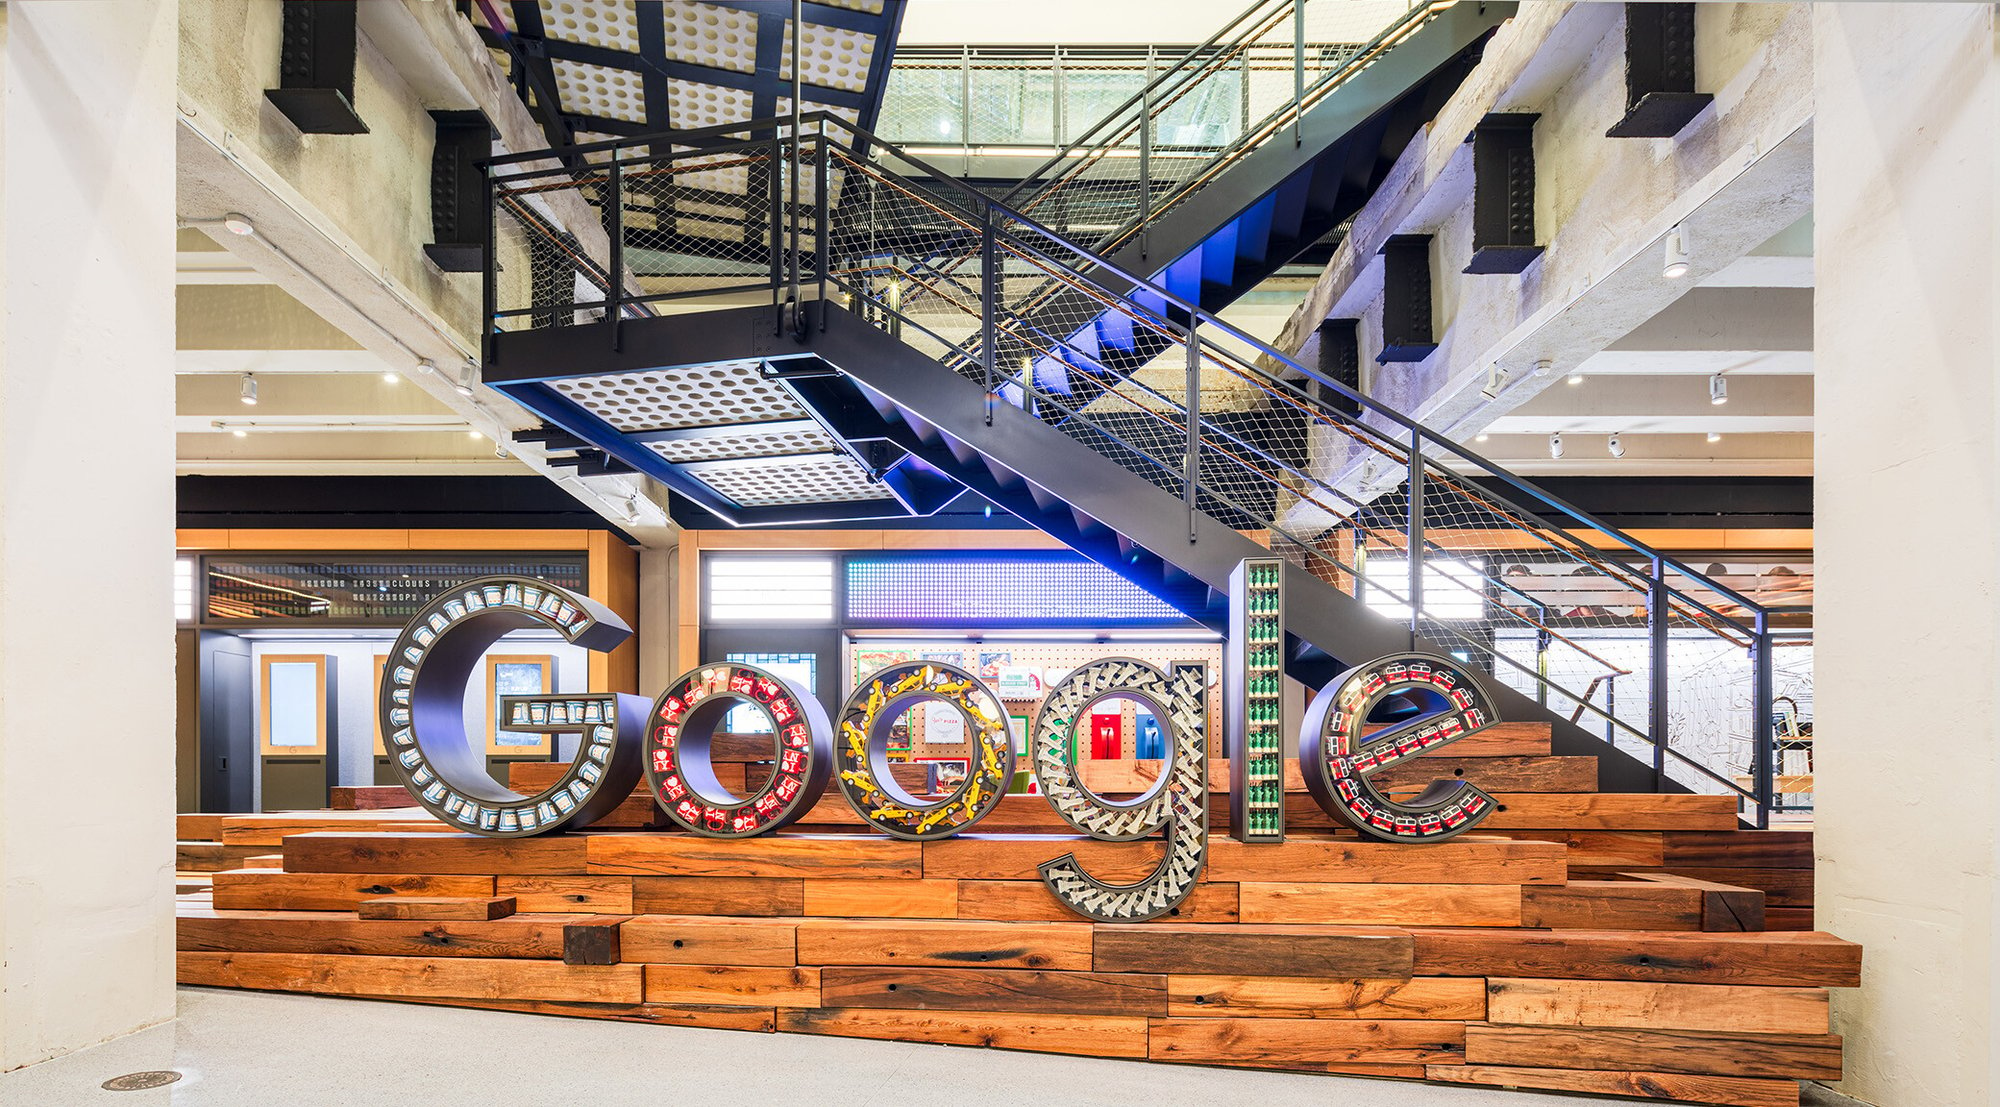 Experiential activation of Google logo